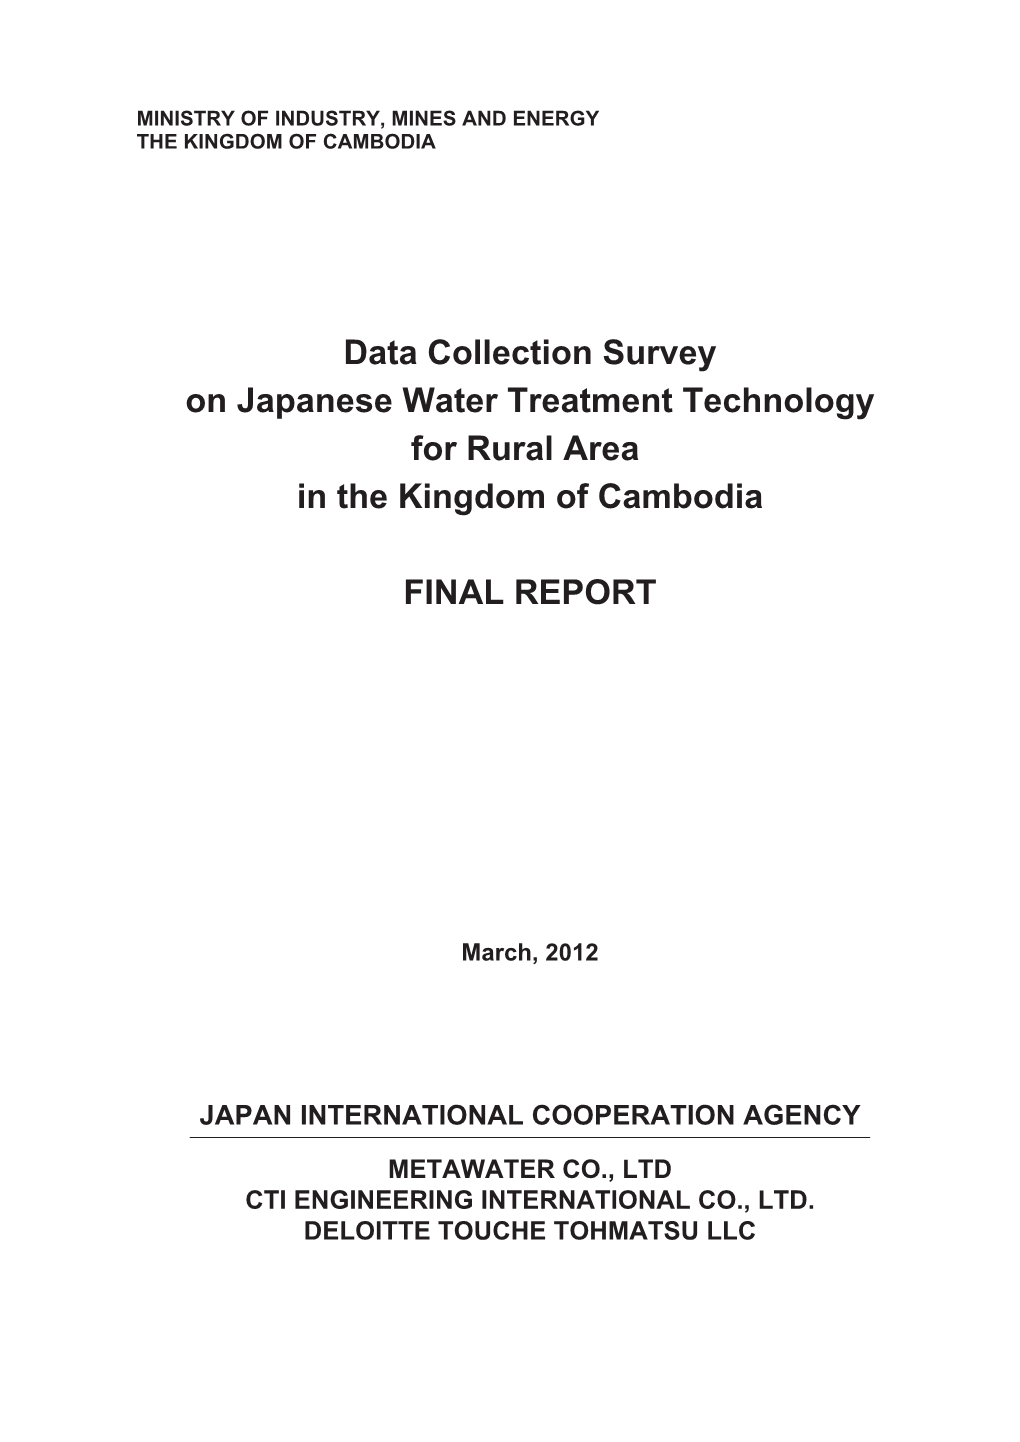 Data Collection Survey on Japanese Water Treatment Technology for Rural Area in the Kingdom of Cambodia